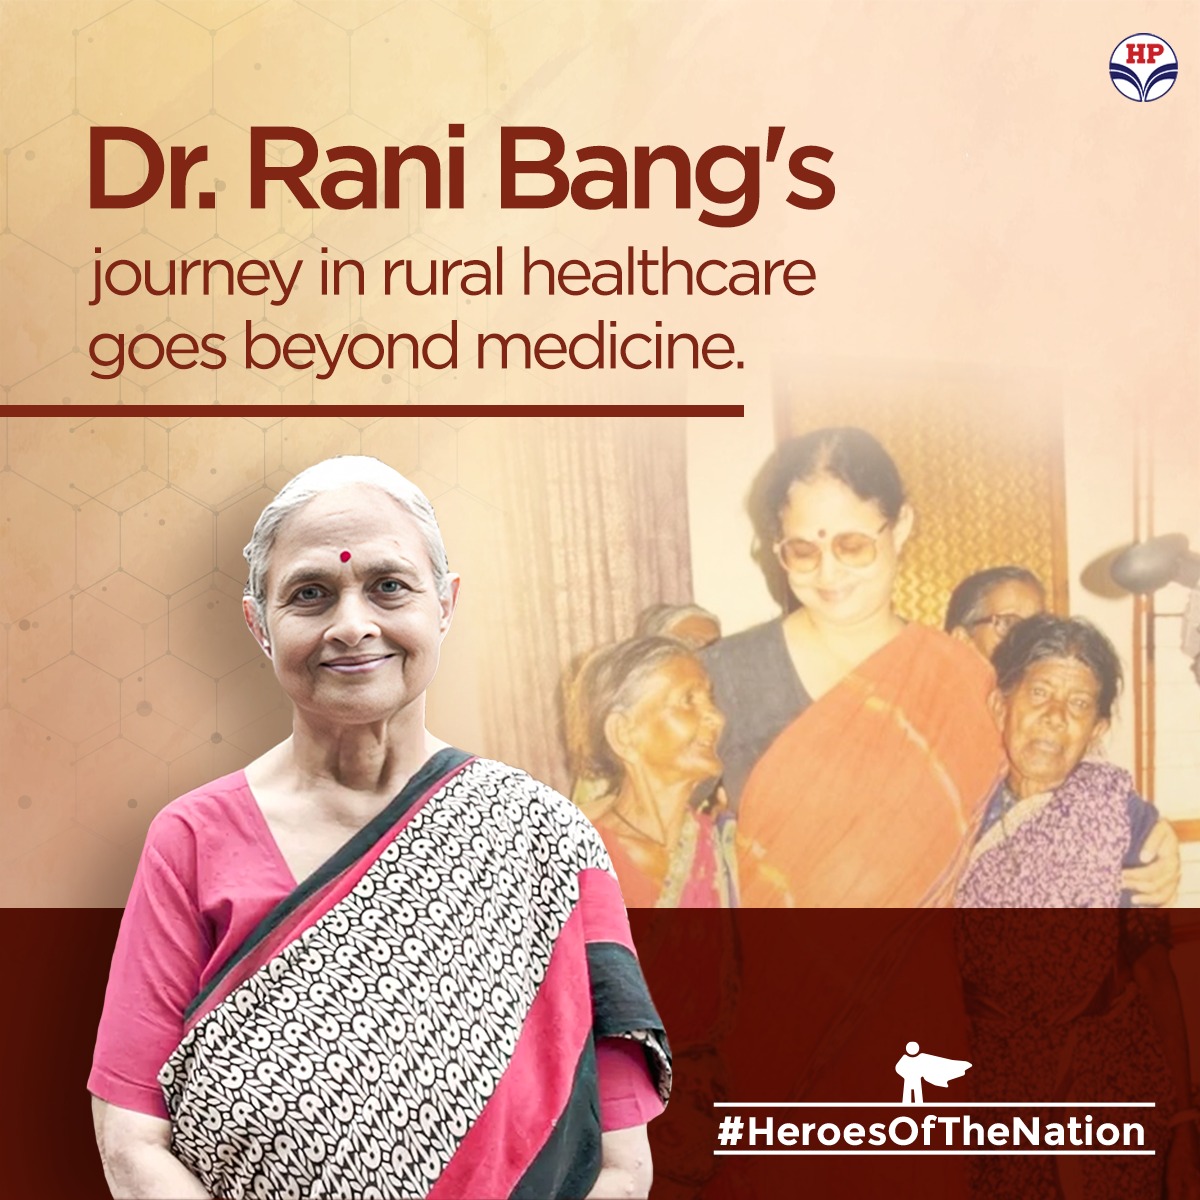 Dr. Rani Bang, rural gynecologist, learns holistic healthcare from widowed Rai-bai. Understanding rural perceptions, facing challenges like sex worker rehab, she commits to addressing rural health needs. #HPRetail #MeraHPPump @HPCL #HerosoftheNation